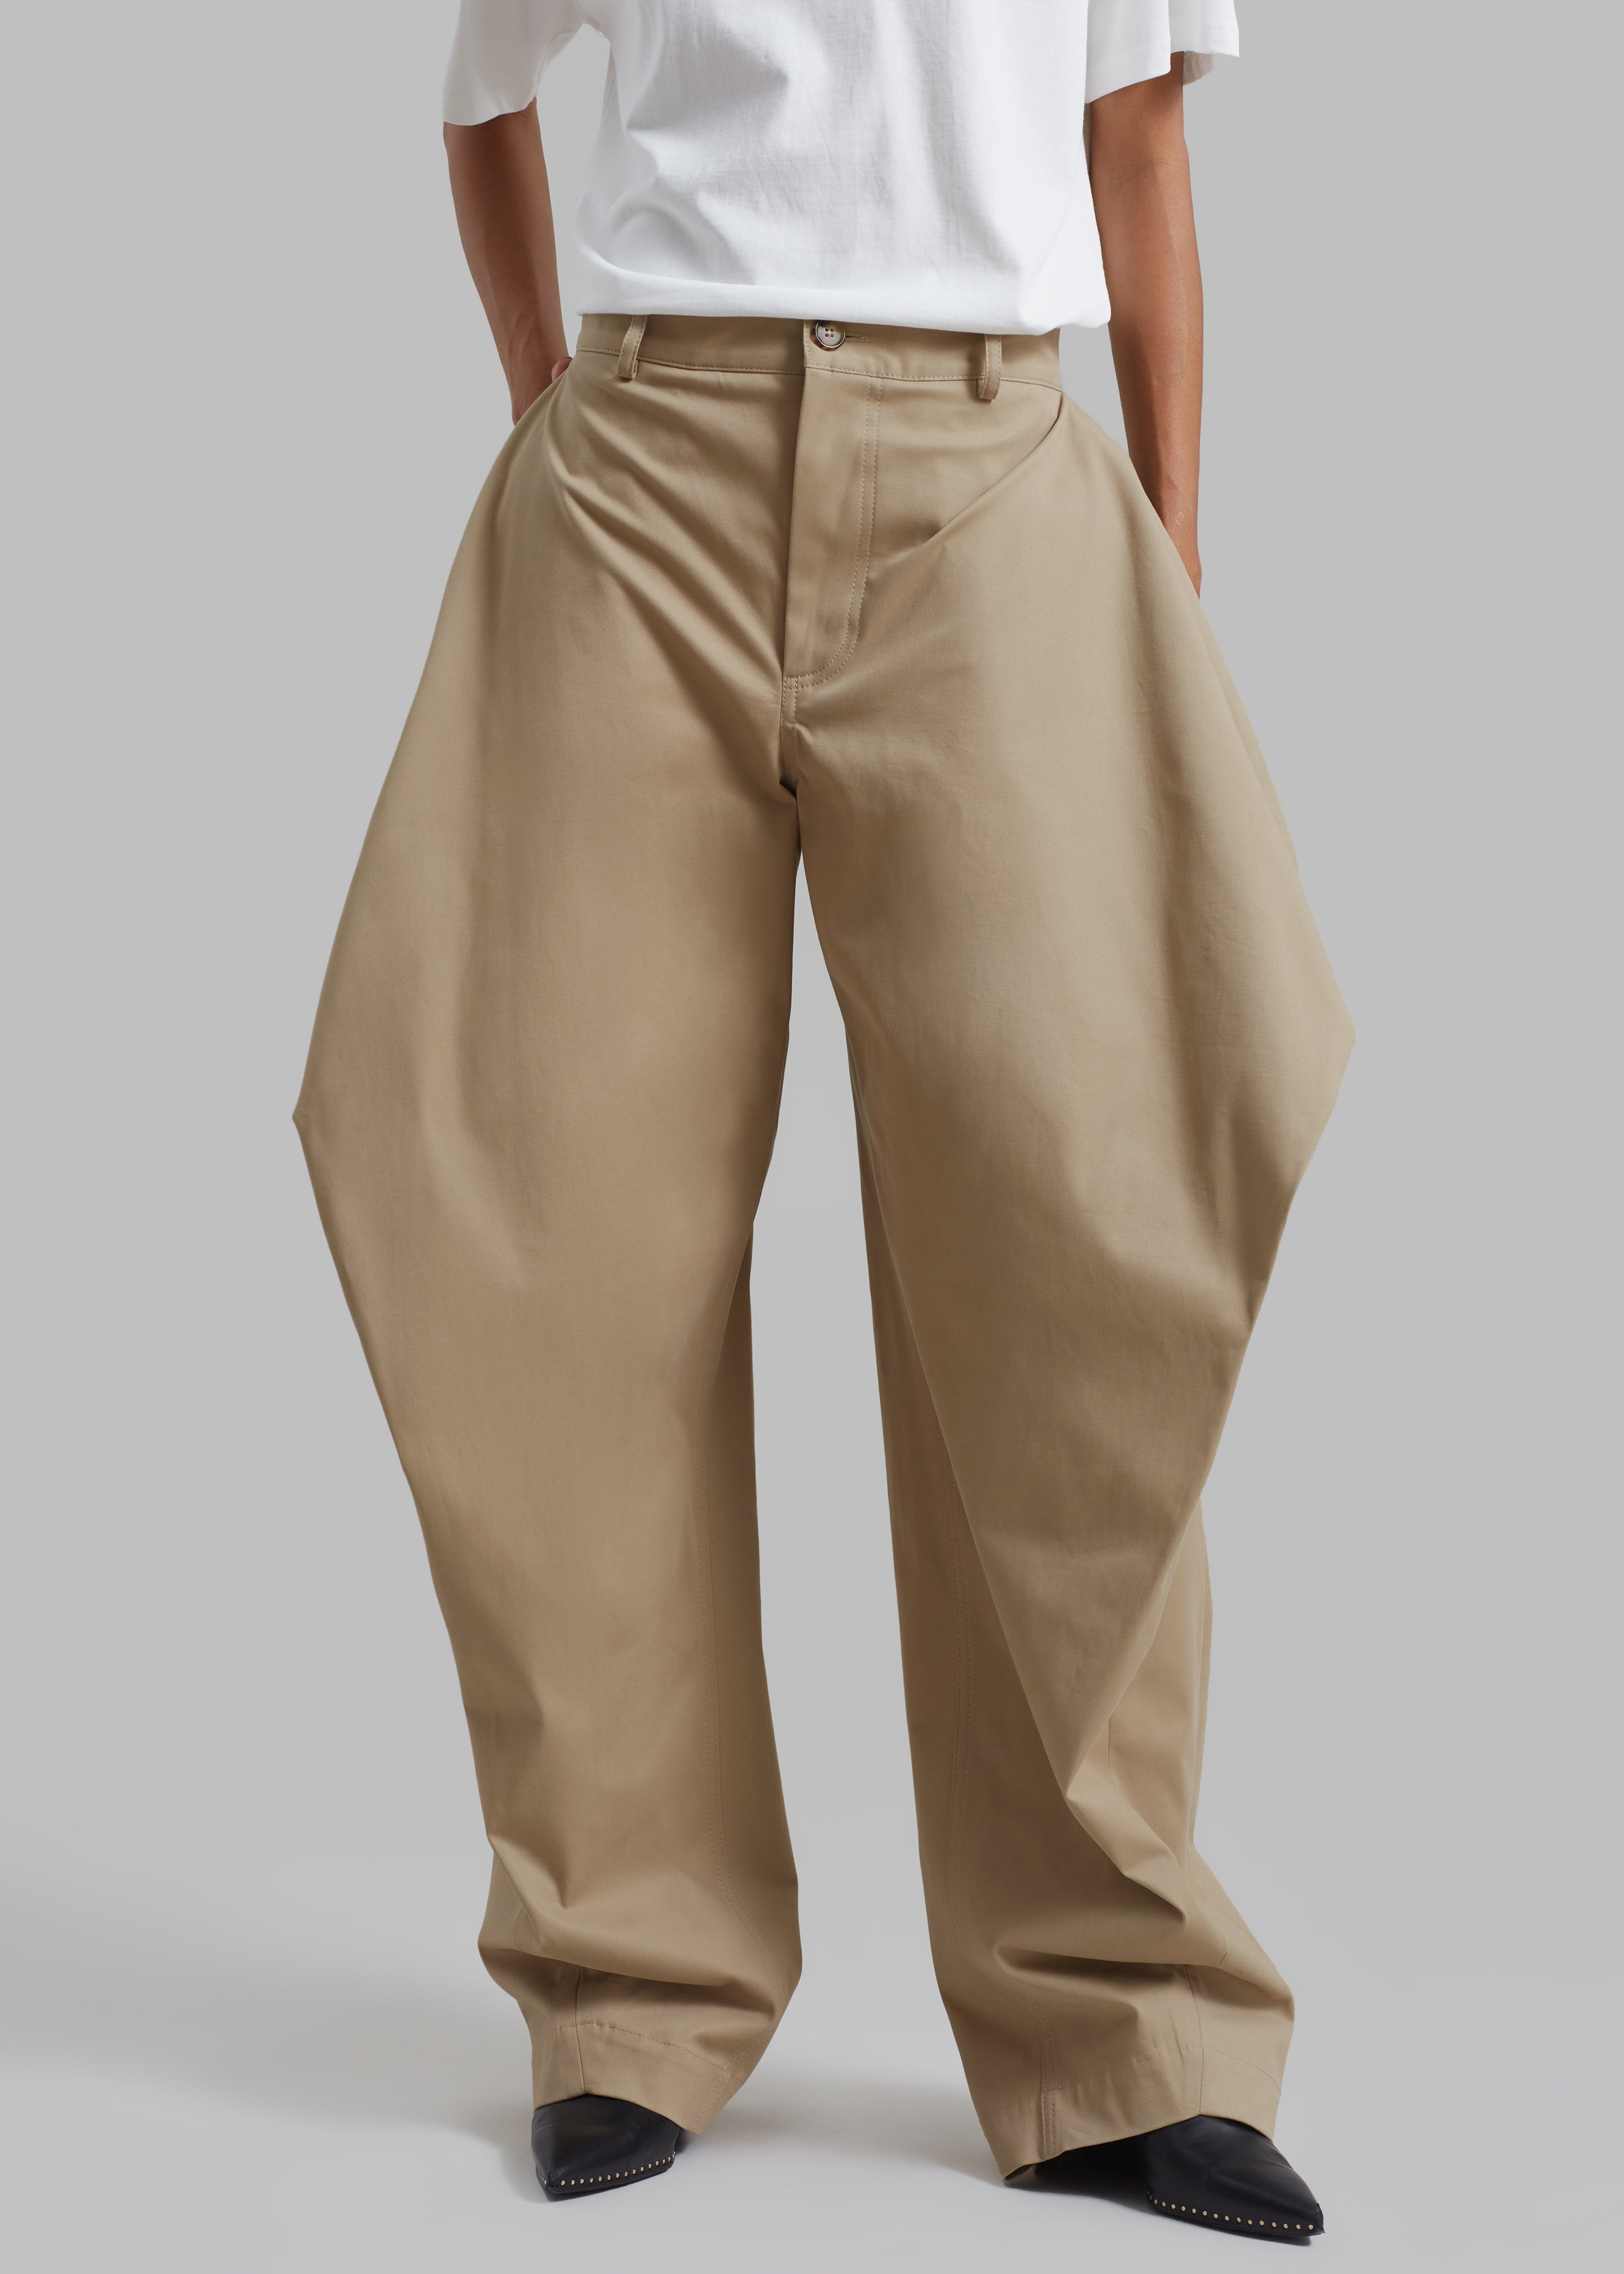 JW Anderson Kite Trousers - Flax - 2